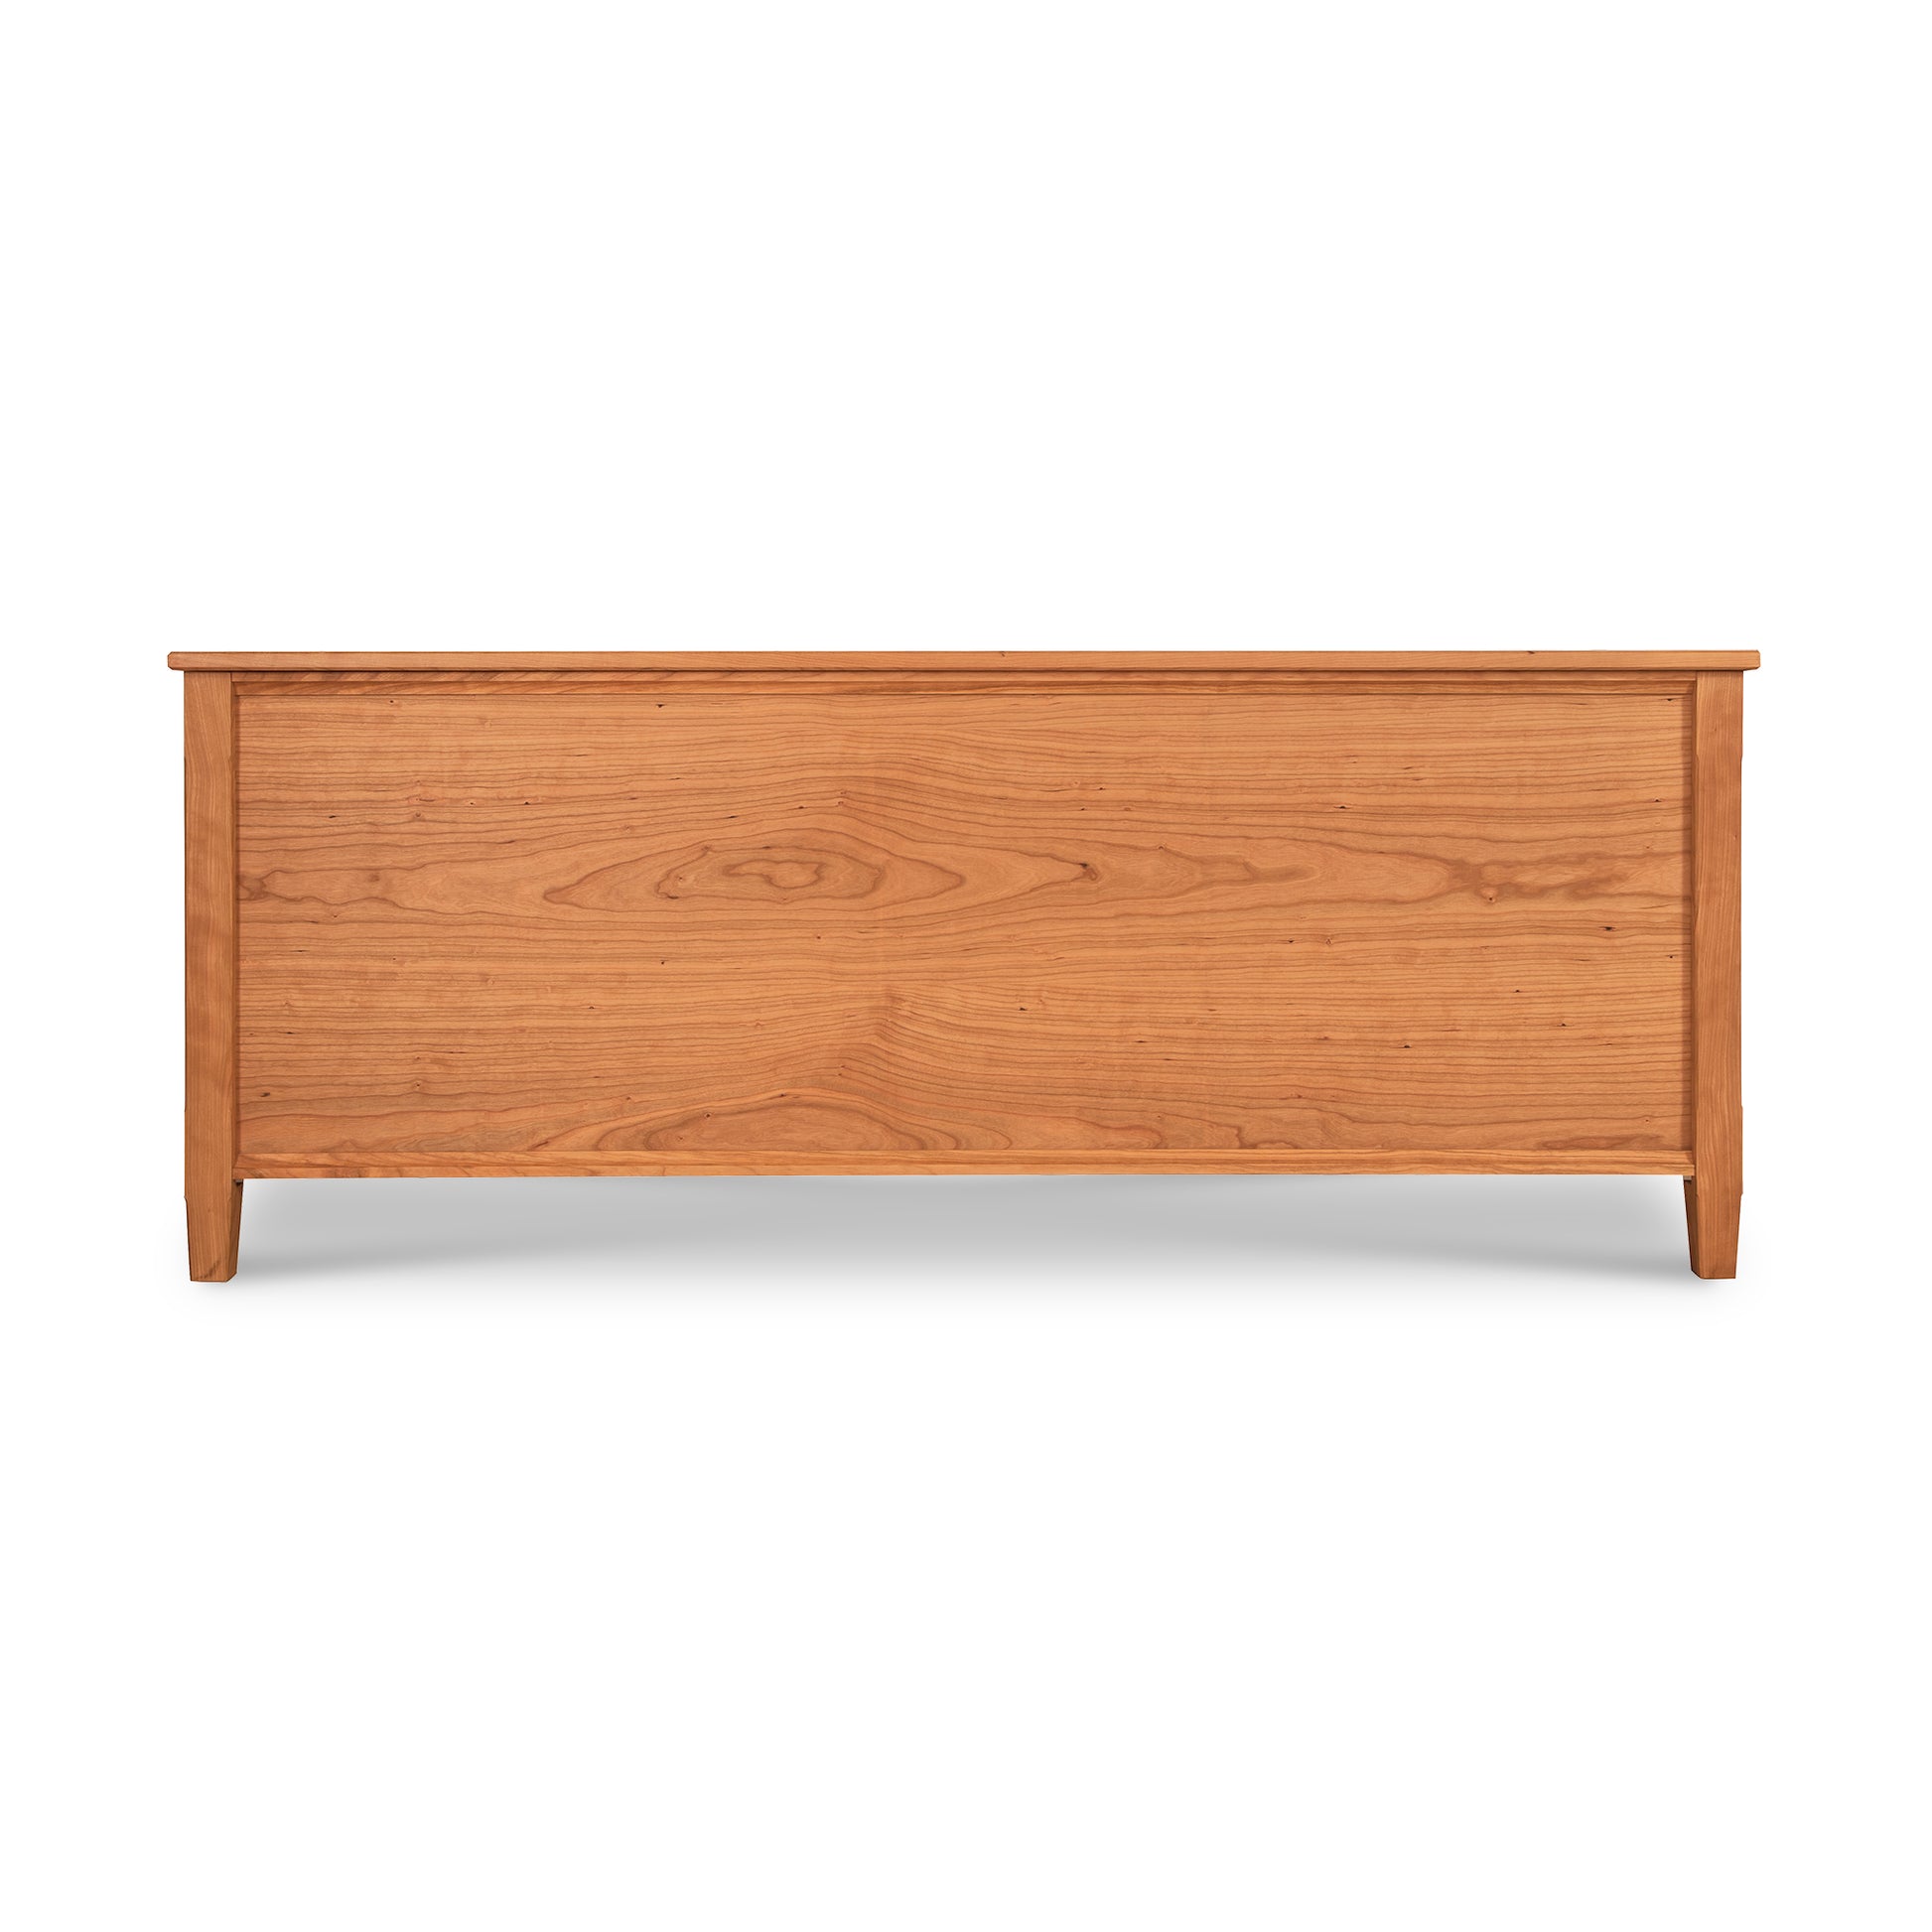 A Vermont Shaker Blanket Chest by Maple Corner Woodworks on a white background.